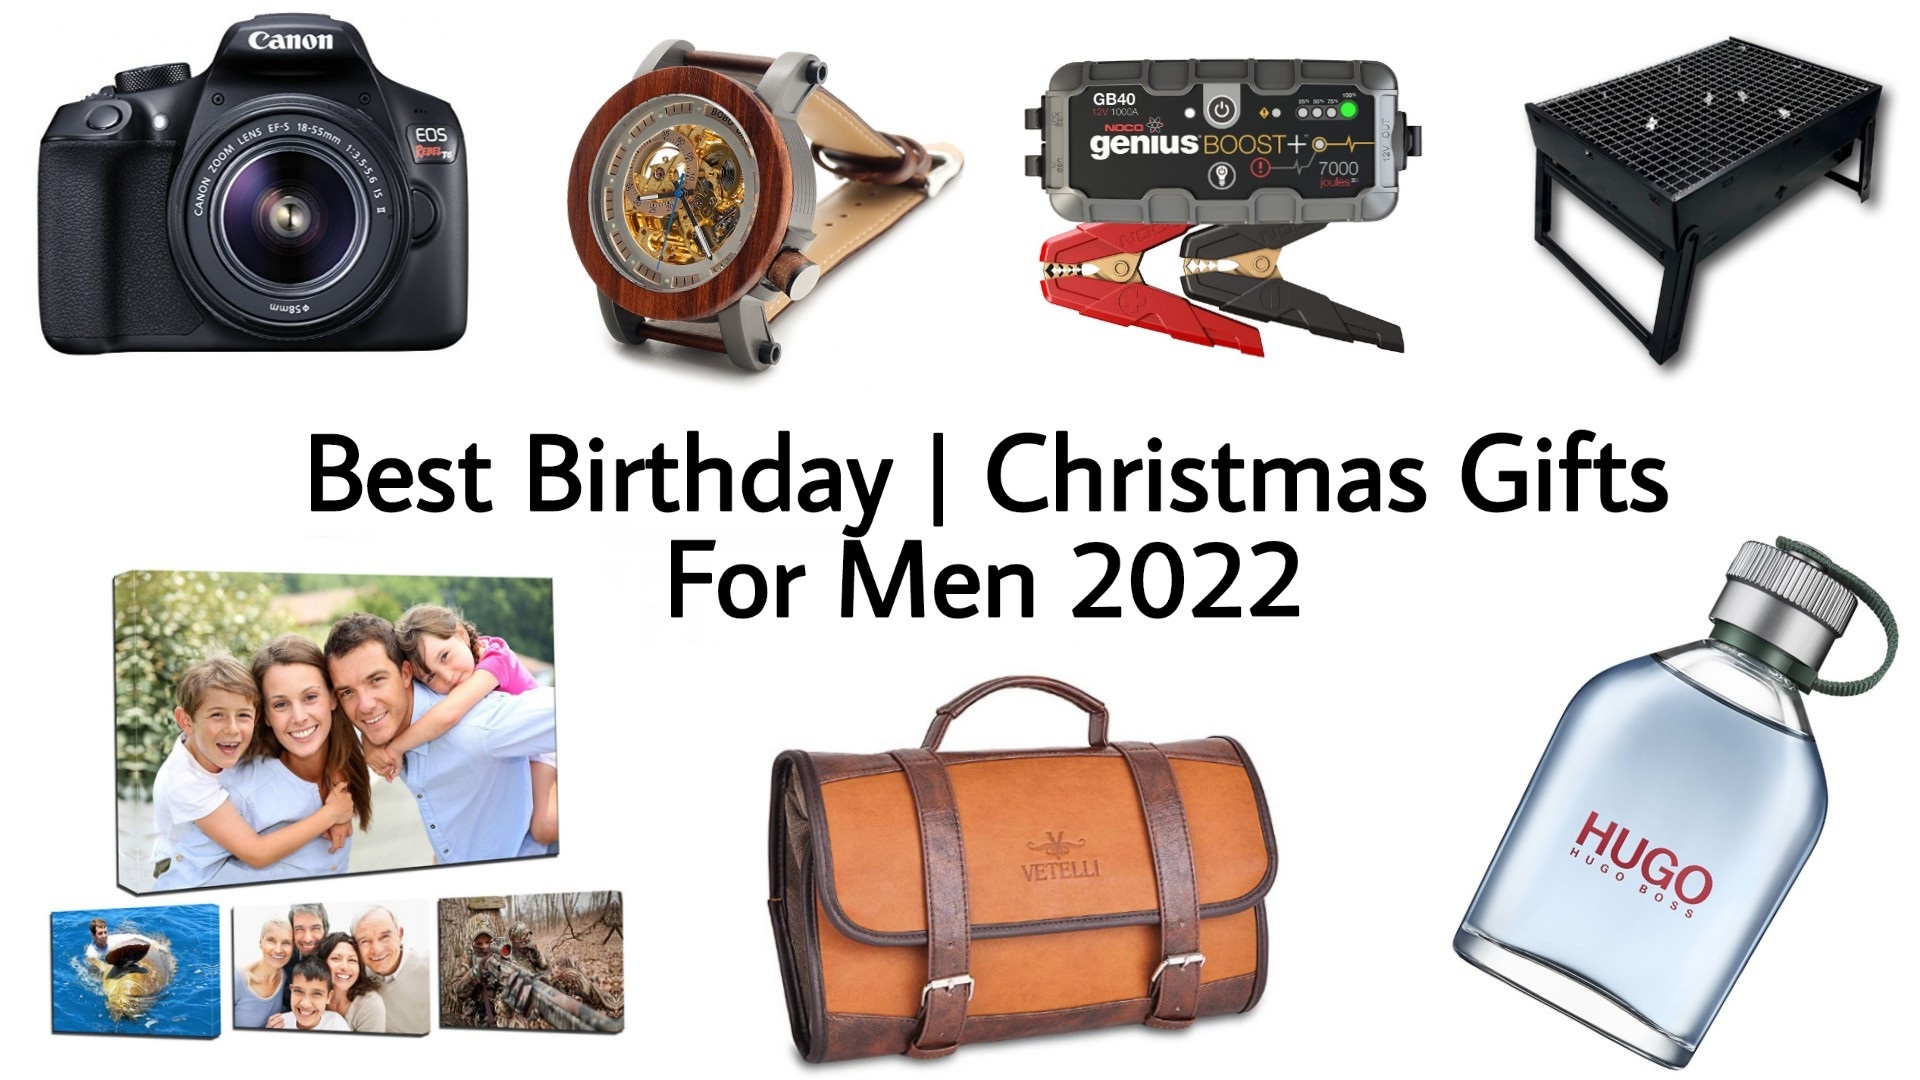 2022 Best Christmas Gifts for Men | Top Birthday Gifts for Men 2022